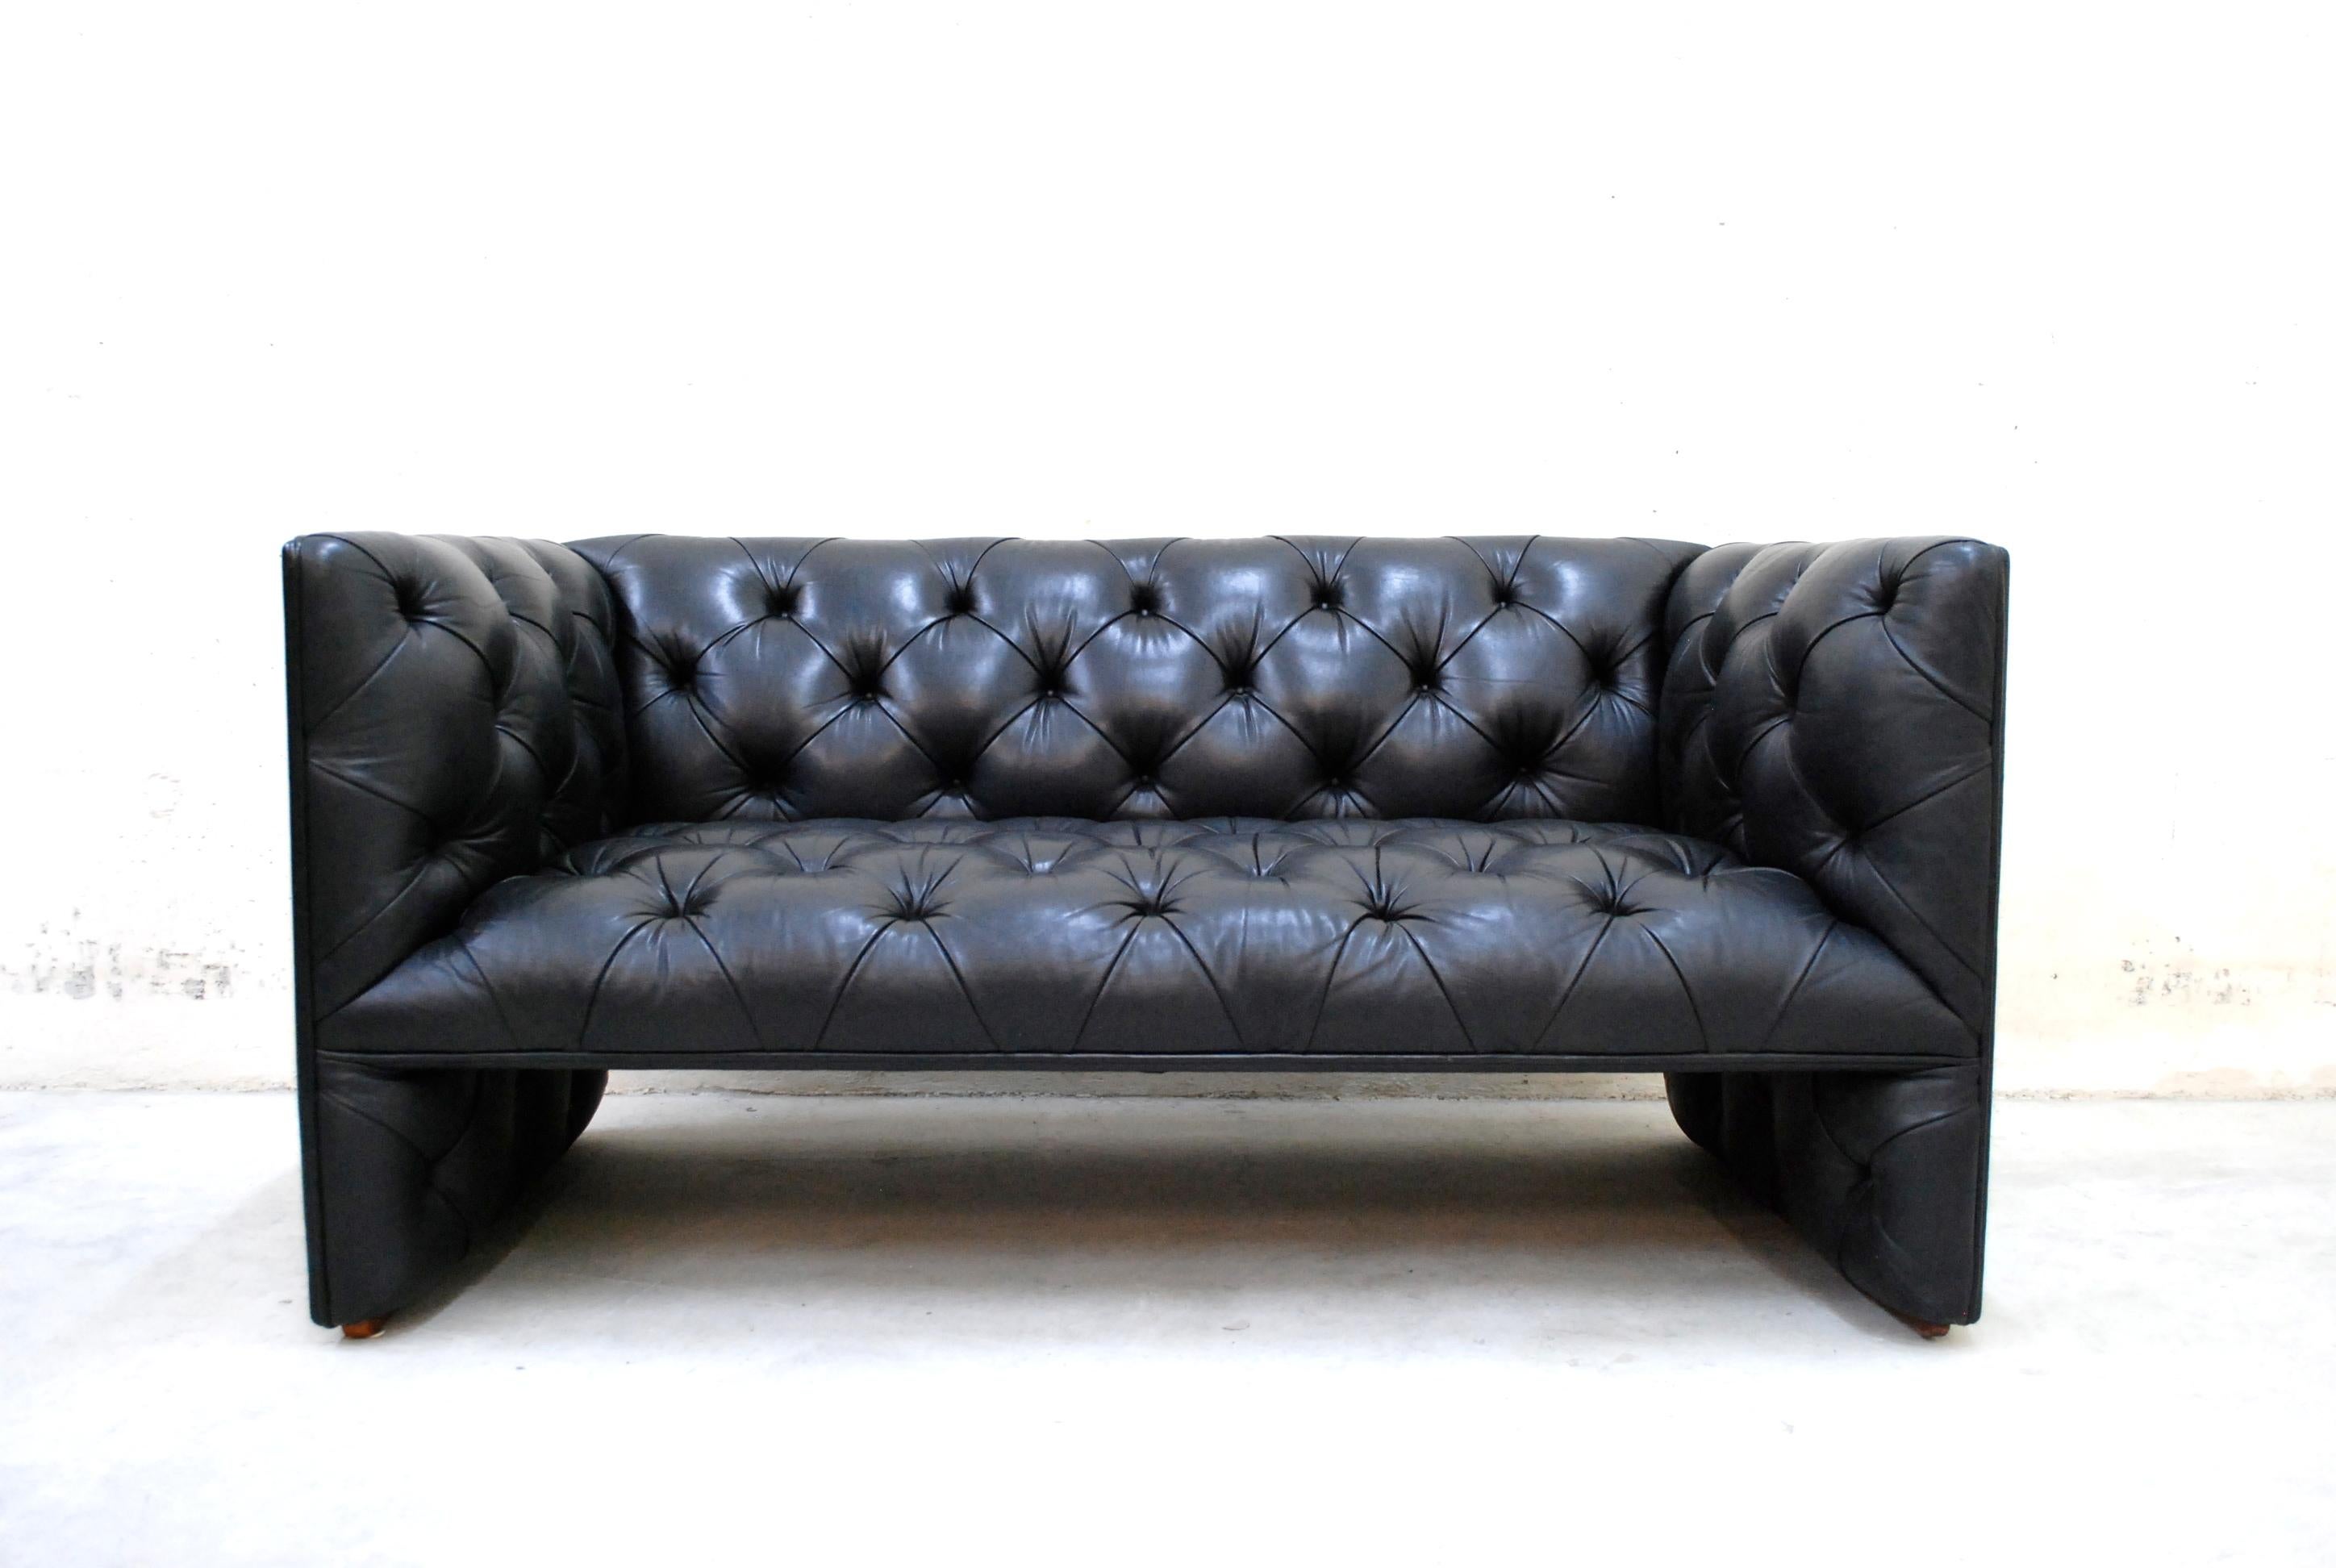 This leather sofa and loveseat was designed by Edward B. Tuttle for Wittmann, 1981.
It´s the early 1st version from 1990.
The first version hast underneath the seat also the tufted leather.
It is a contemporary interpretation of the classic